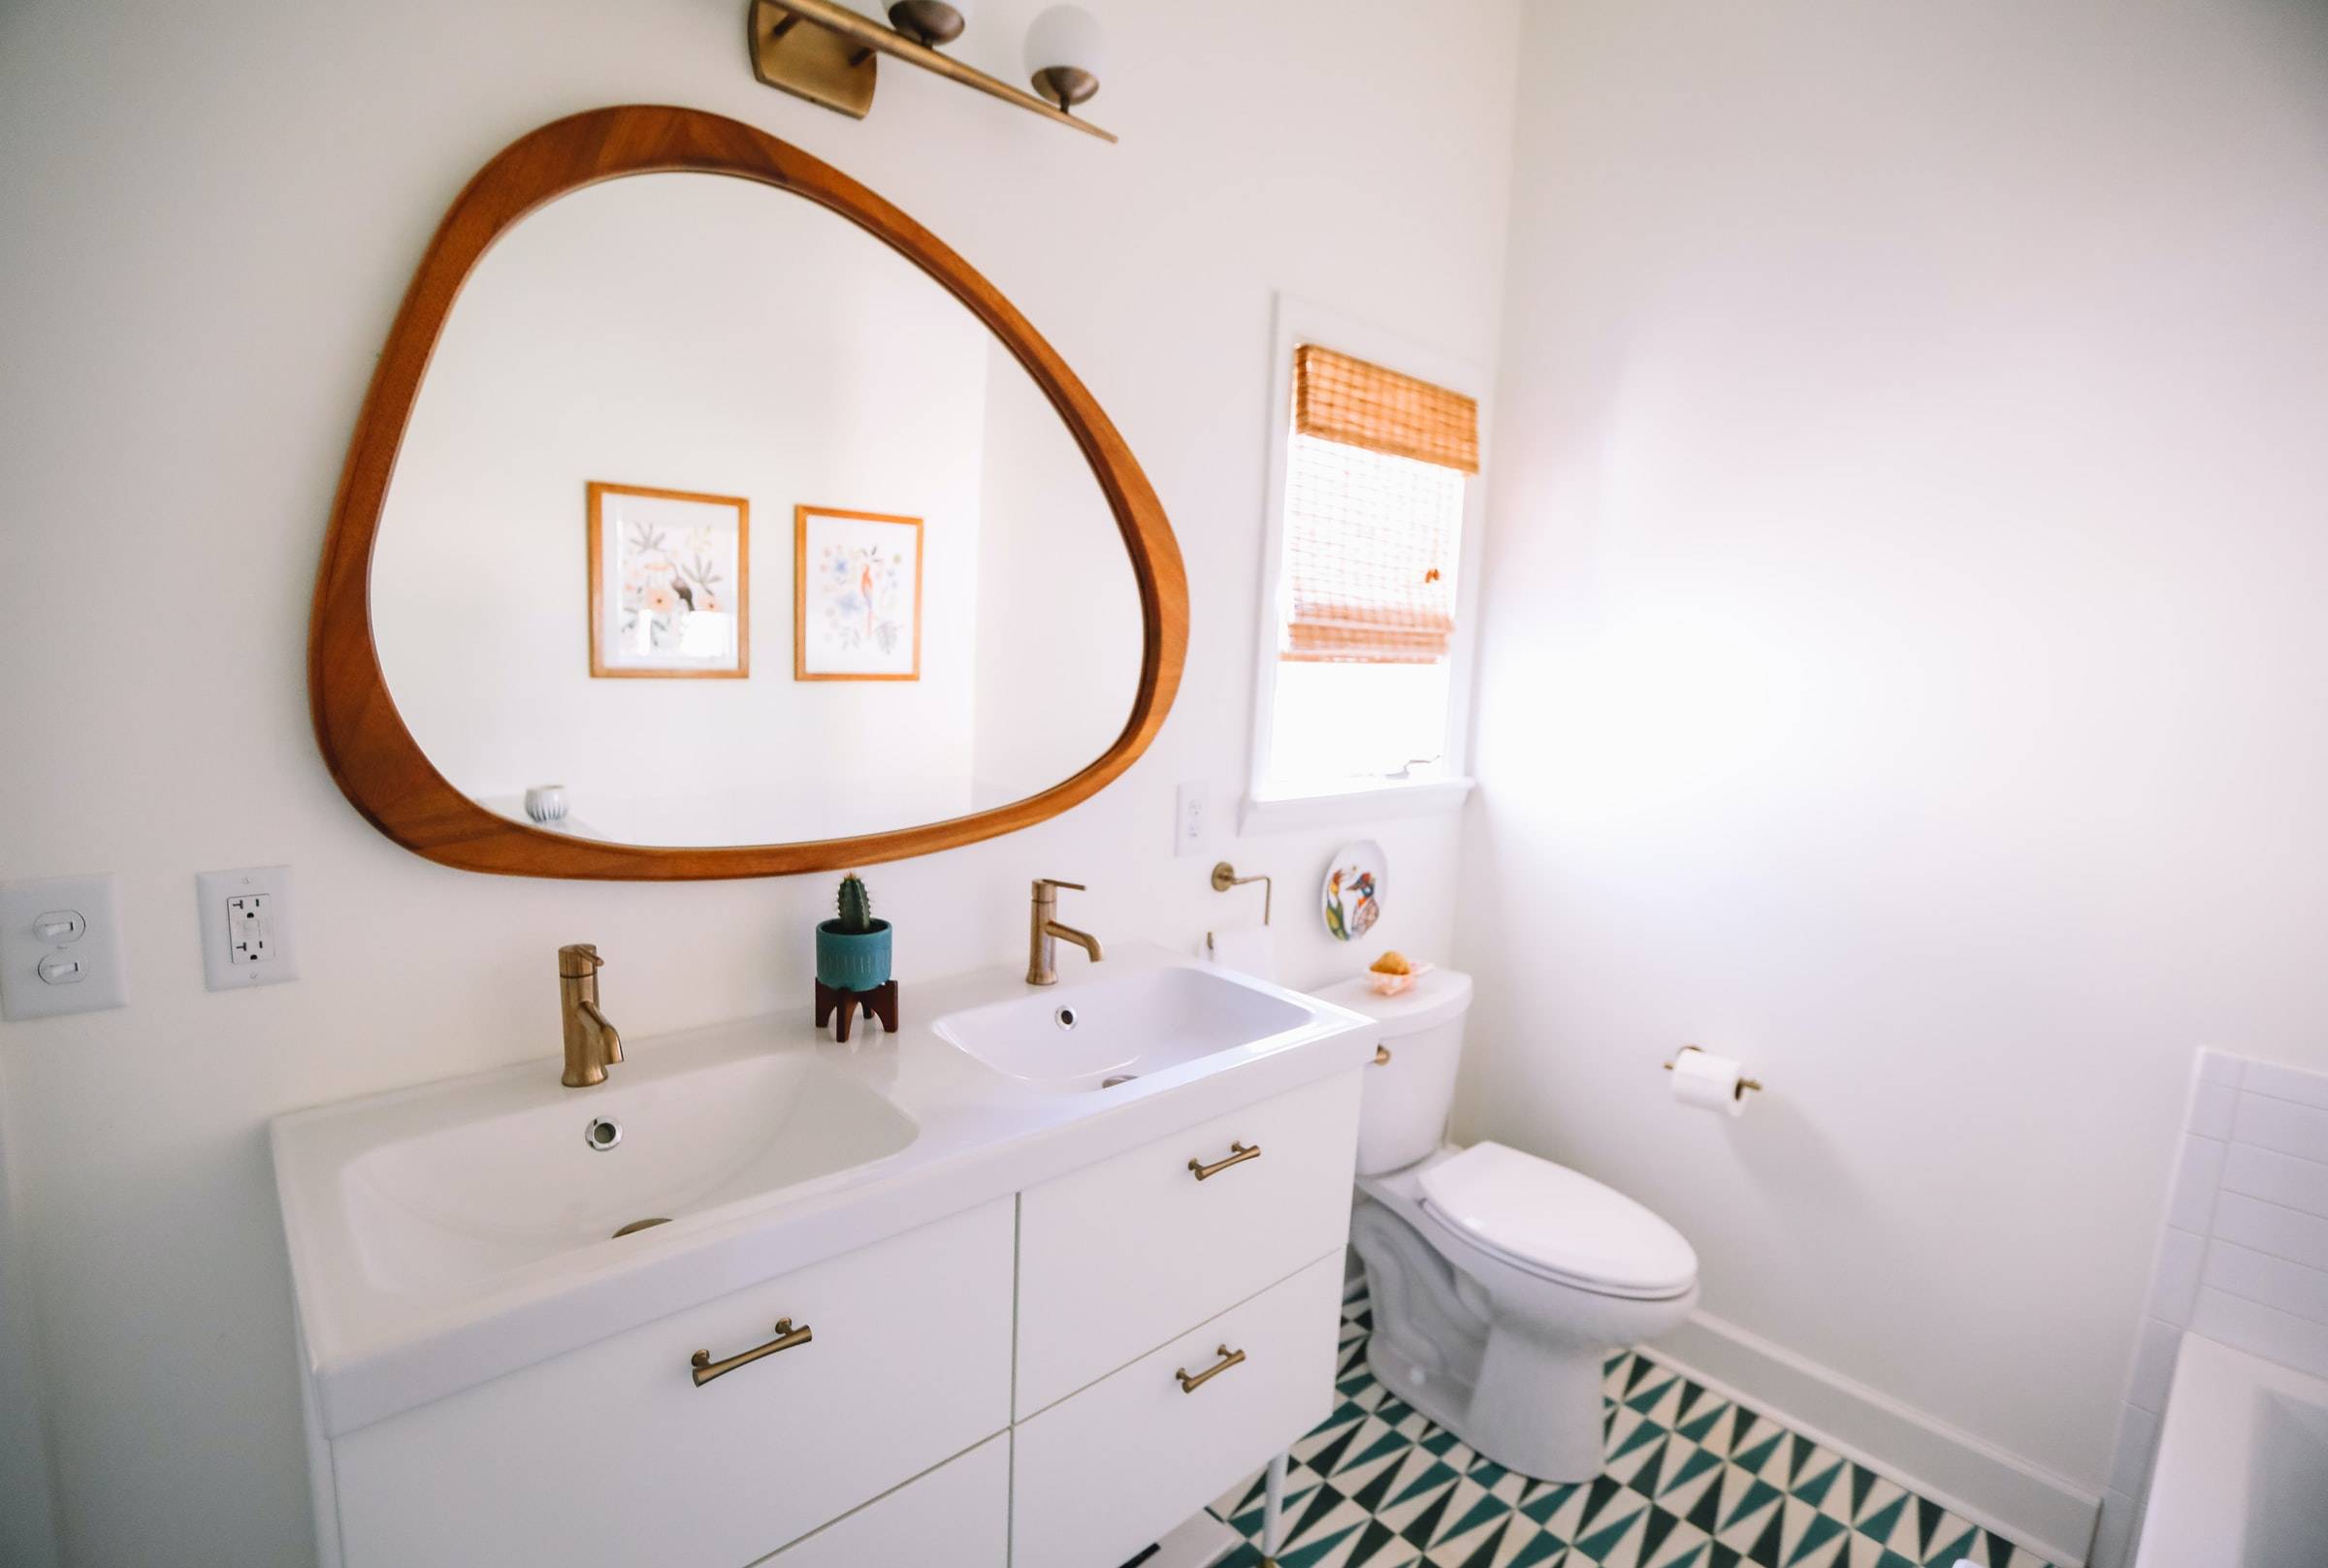 Small Jack and Jill bathroom with plenty of style (from Unsplash)